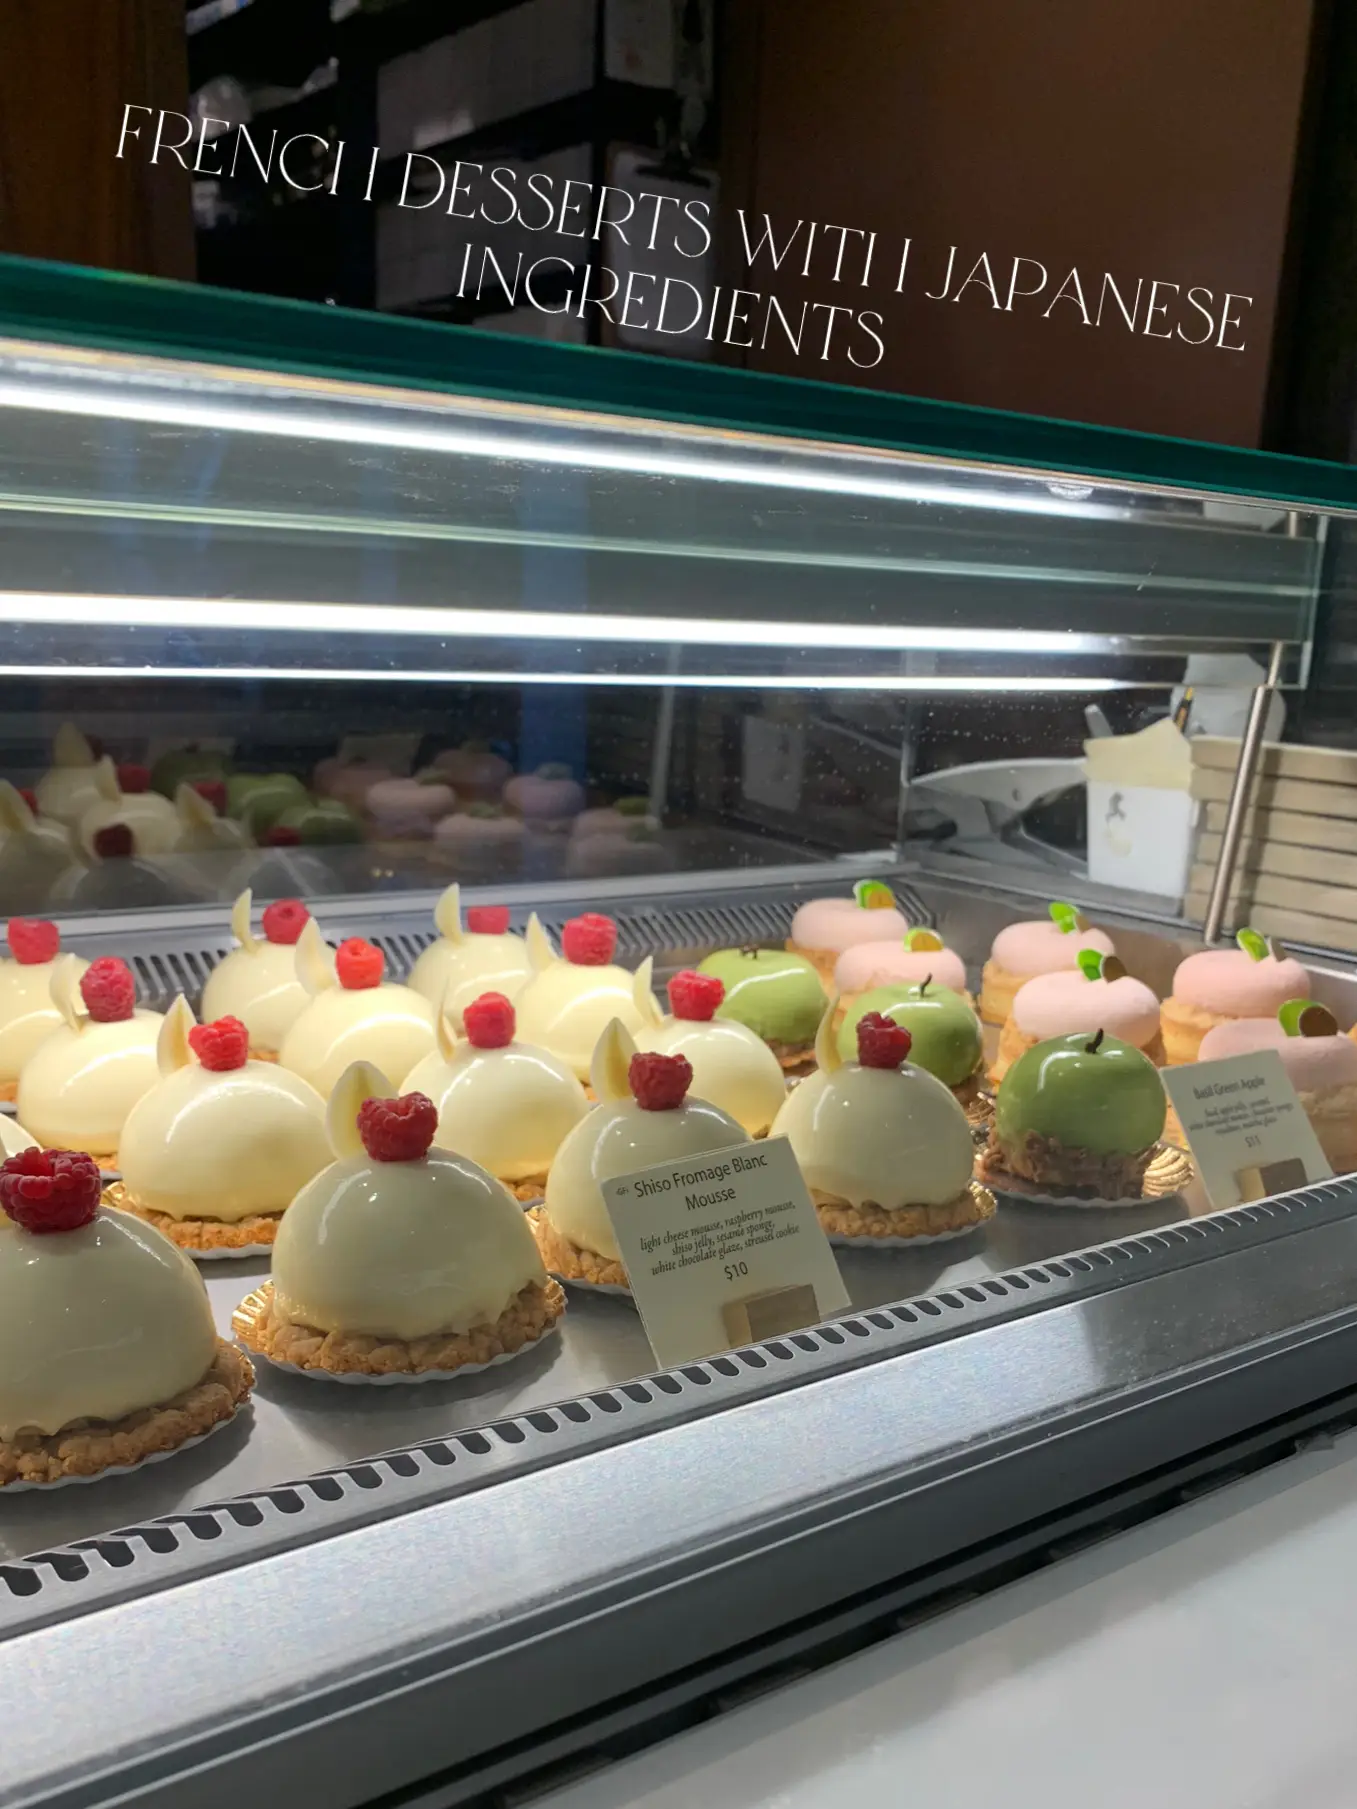  A display of French desserts with Japanese ingredients.